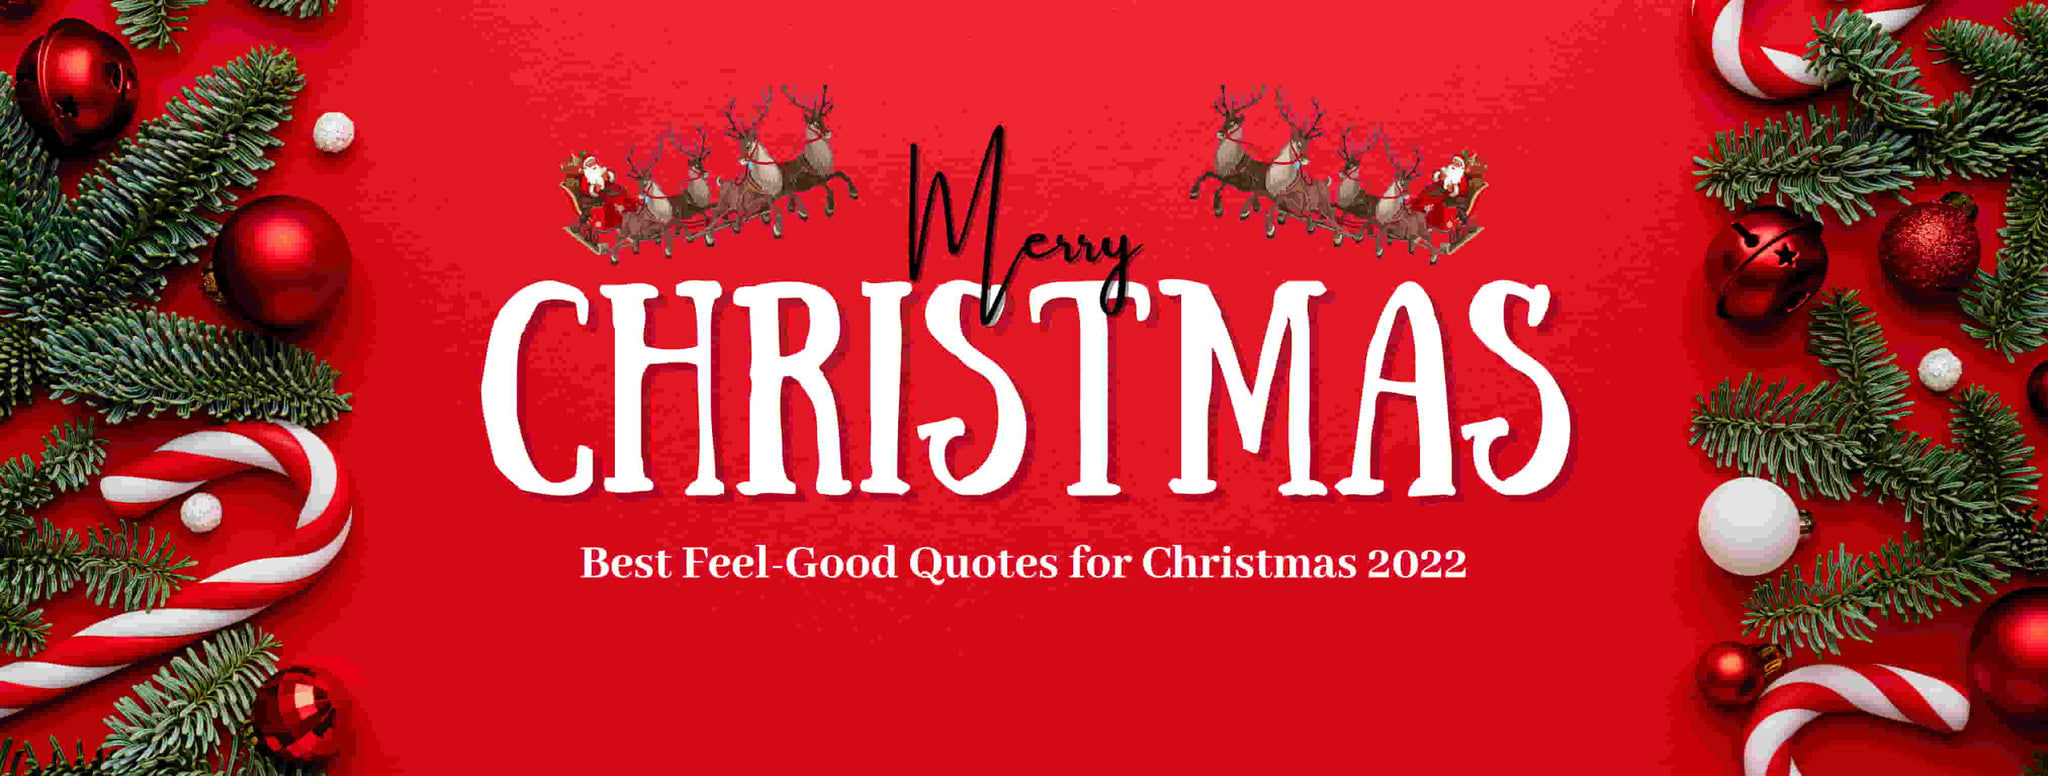 best-feel-good-quotes-for-christmas-2022-viraasi